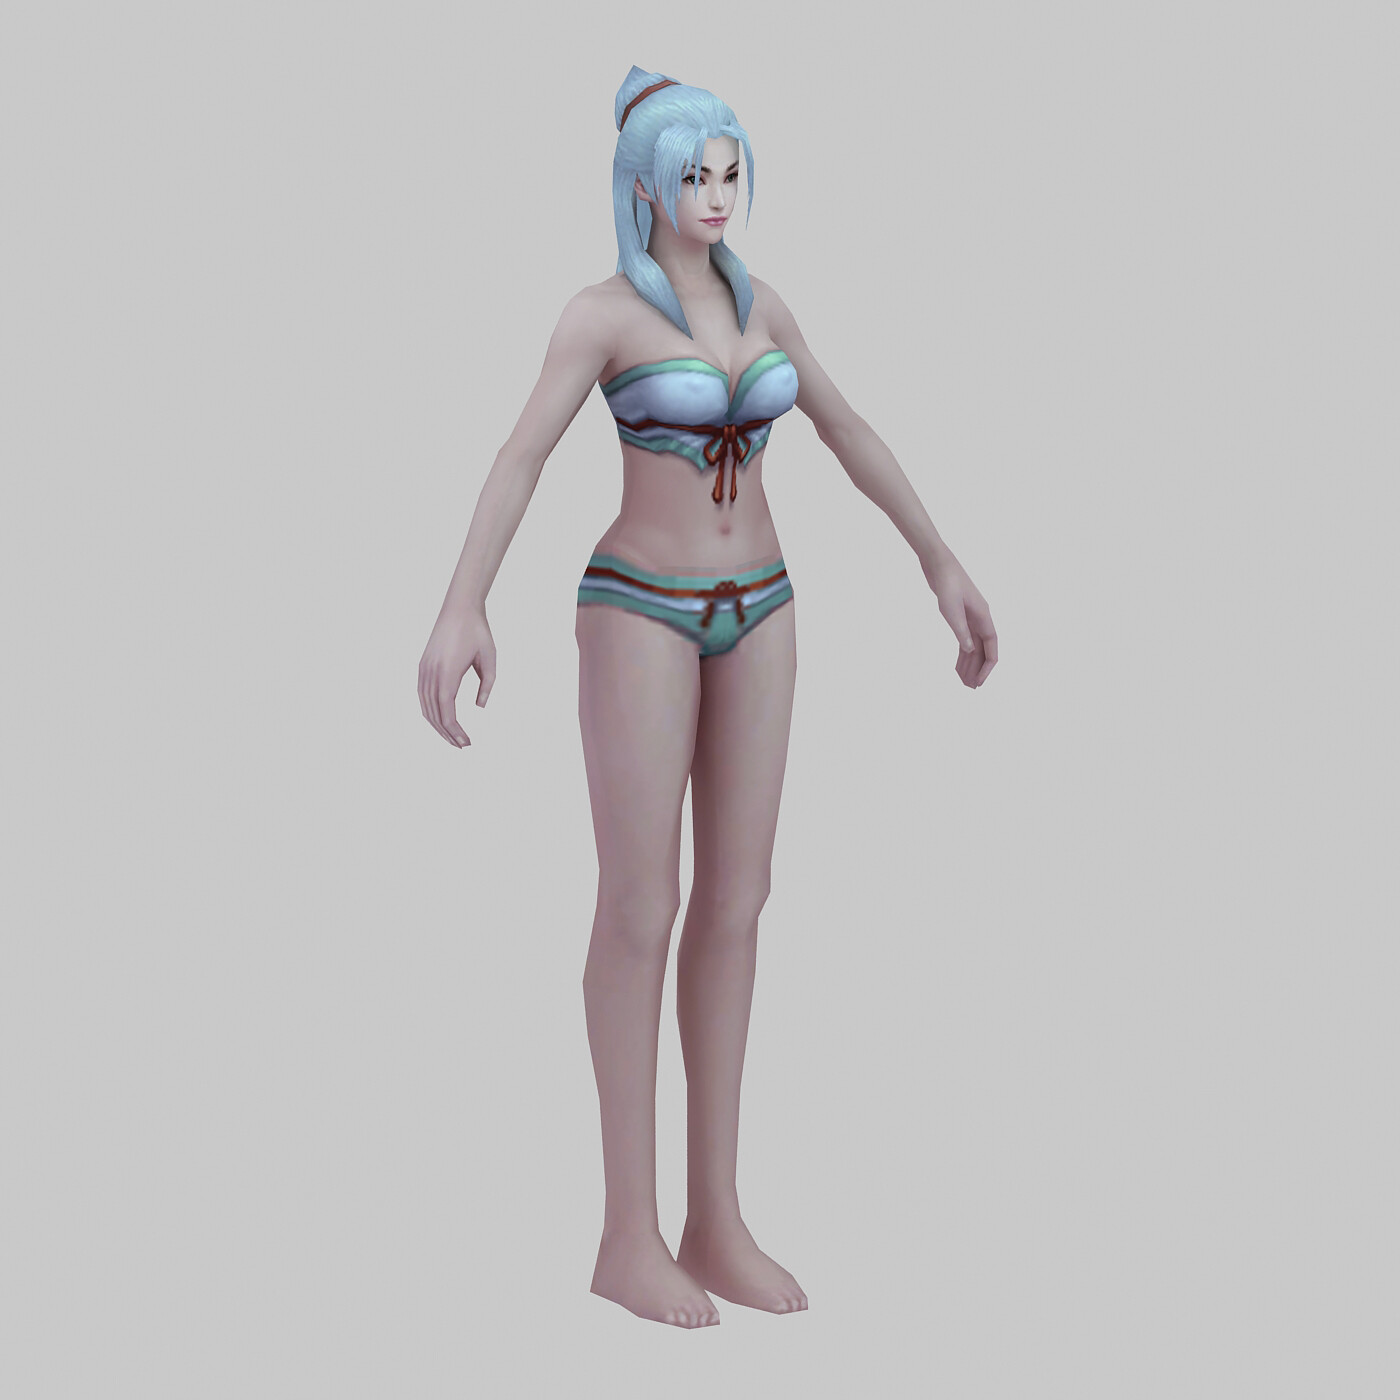 Low poly game character 3D model With textures and UV. 